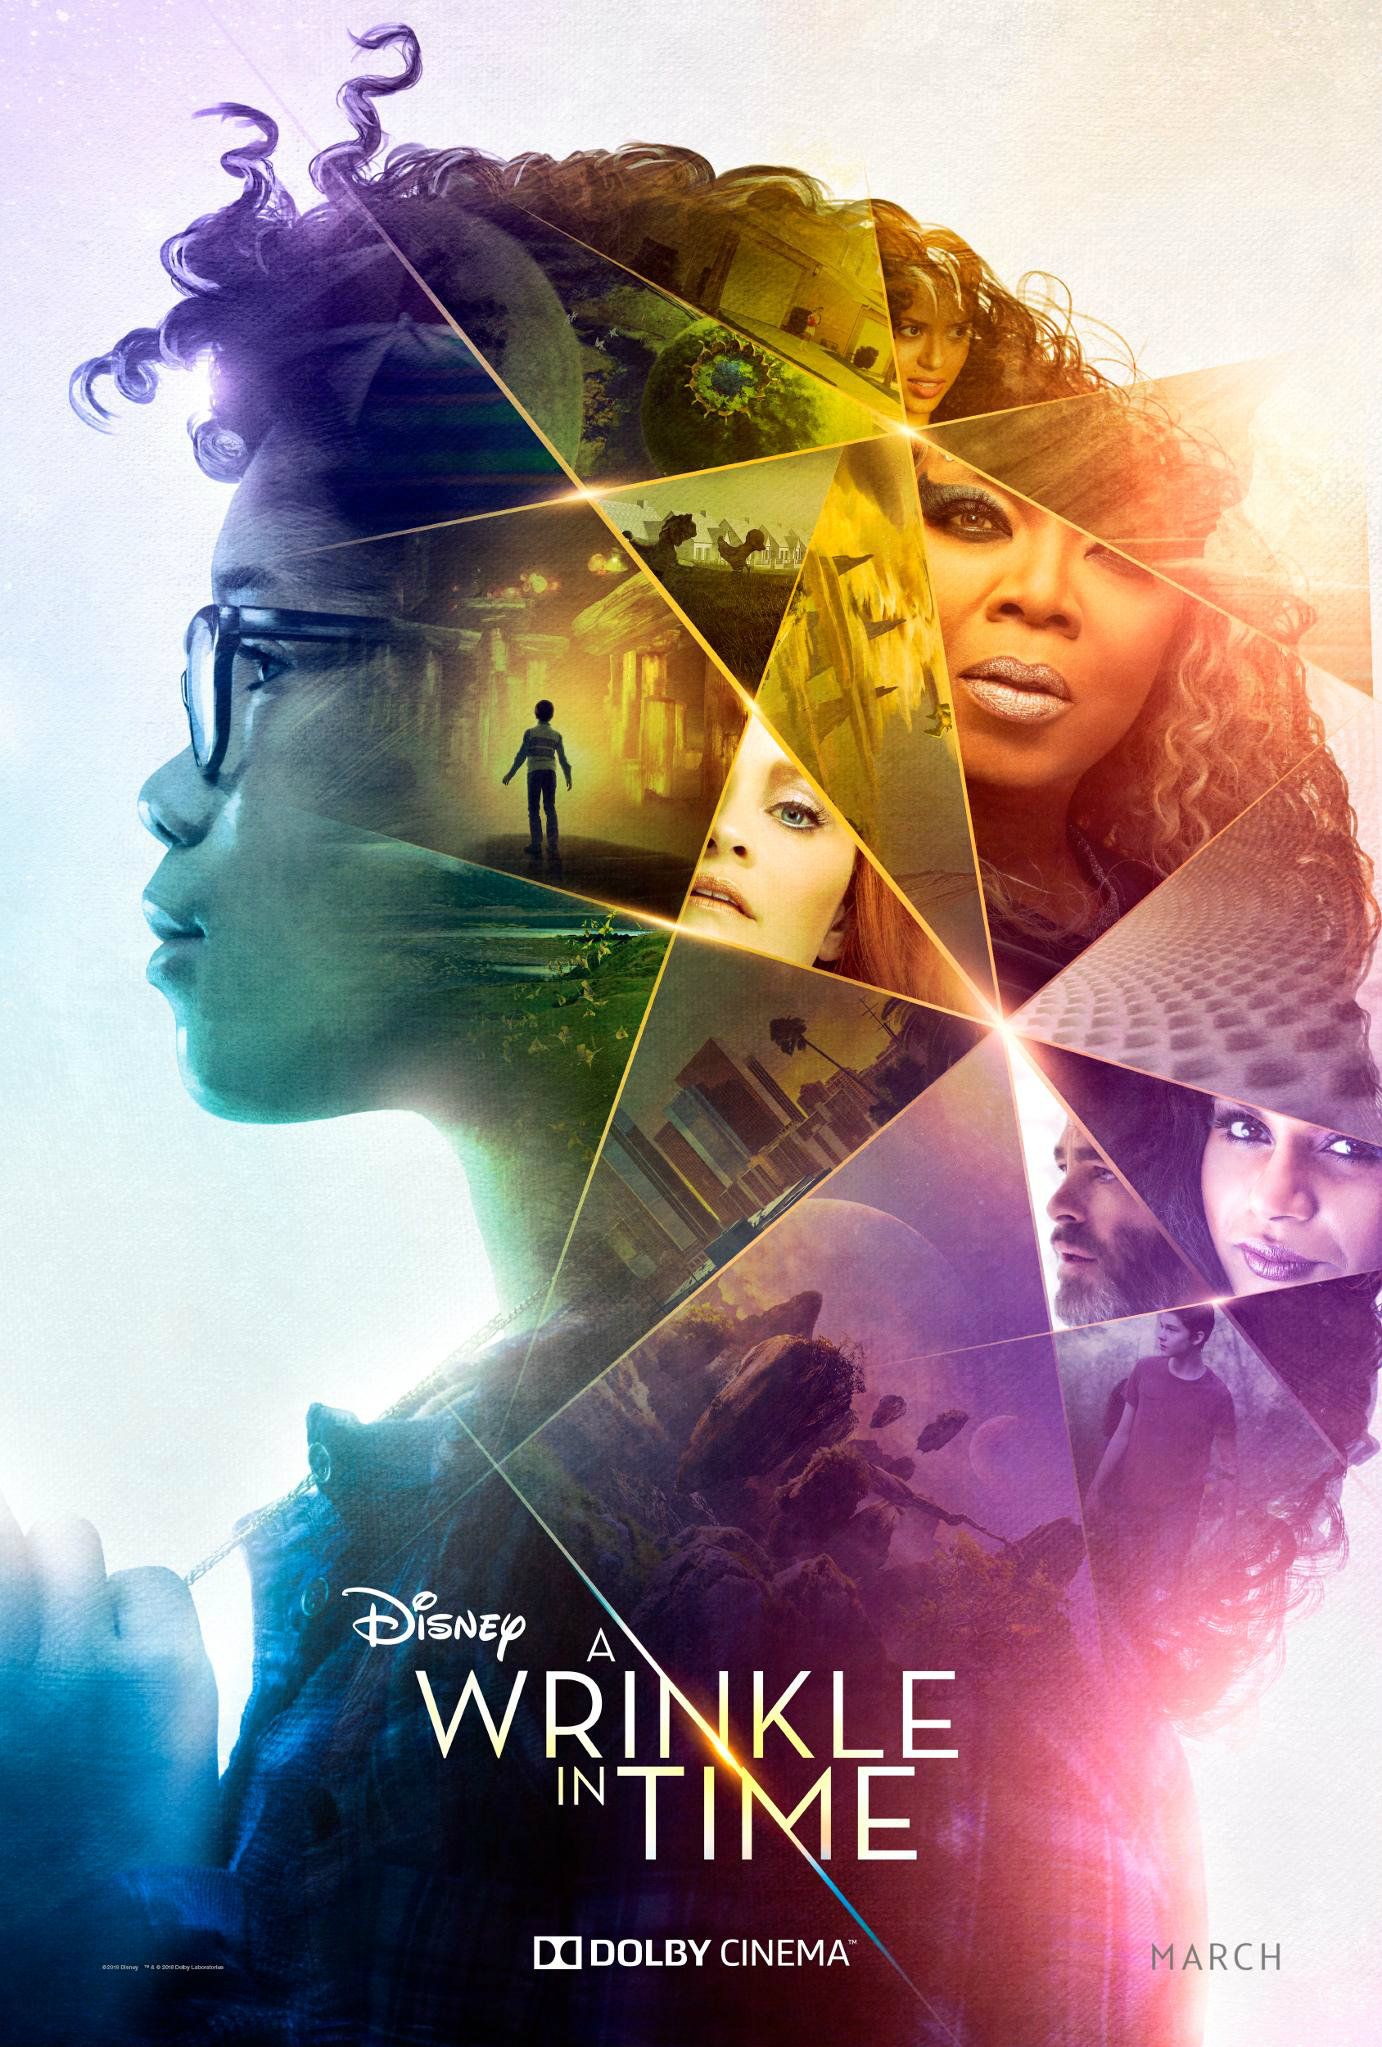 New poster for A Wrinkle in Time